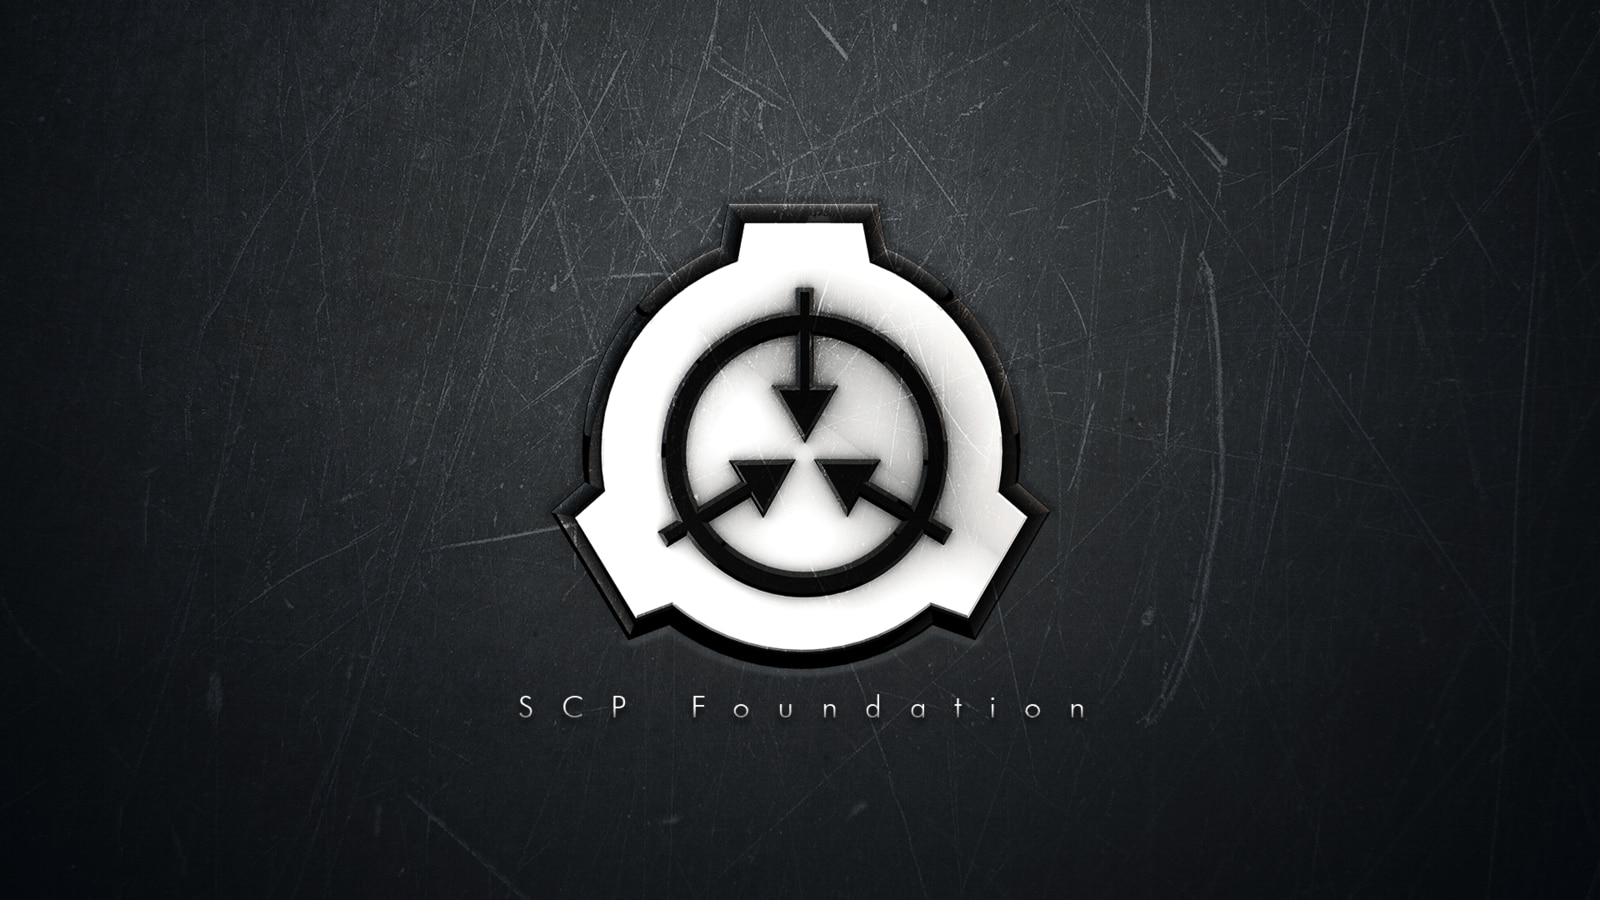 Whats the formula to scp walking camera bobble - Scripting Support -  Developer Forum